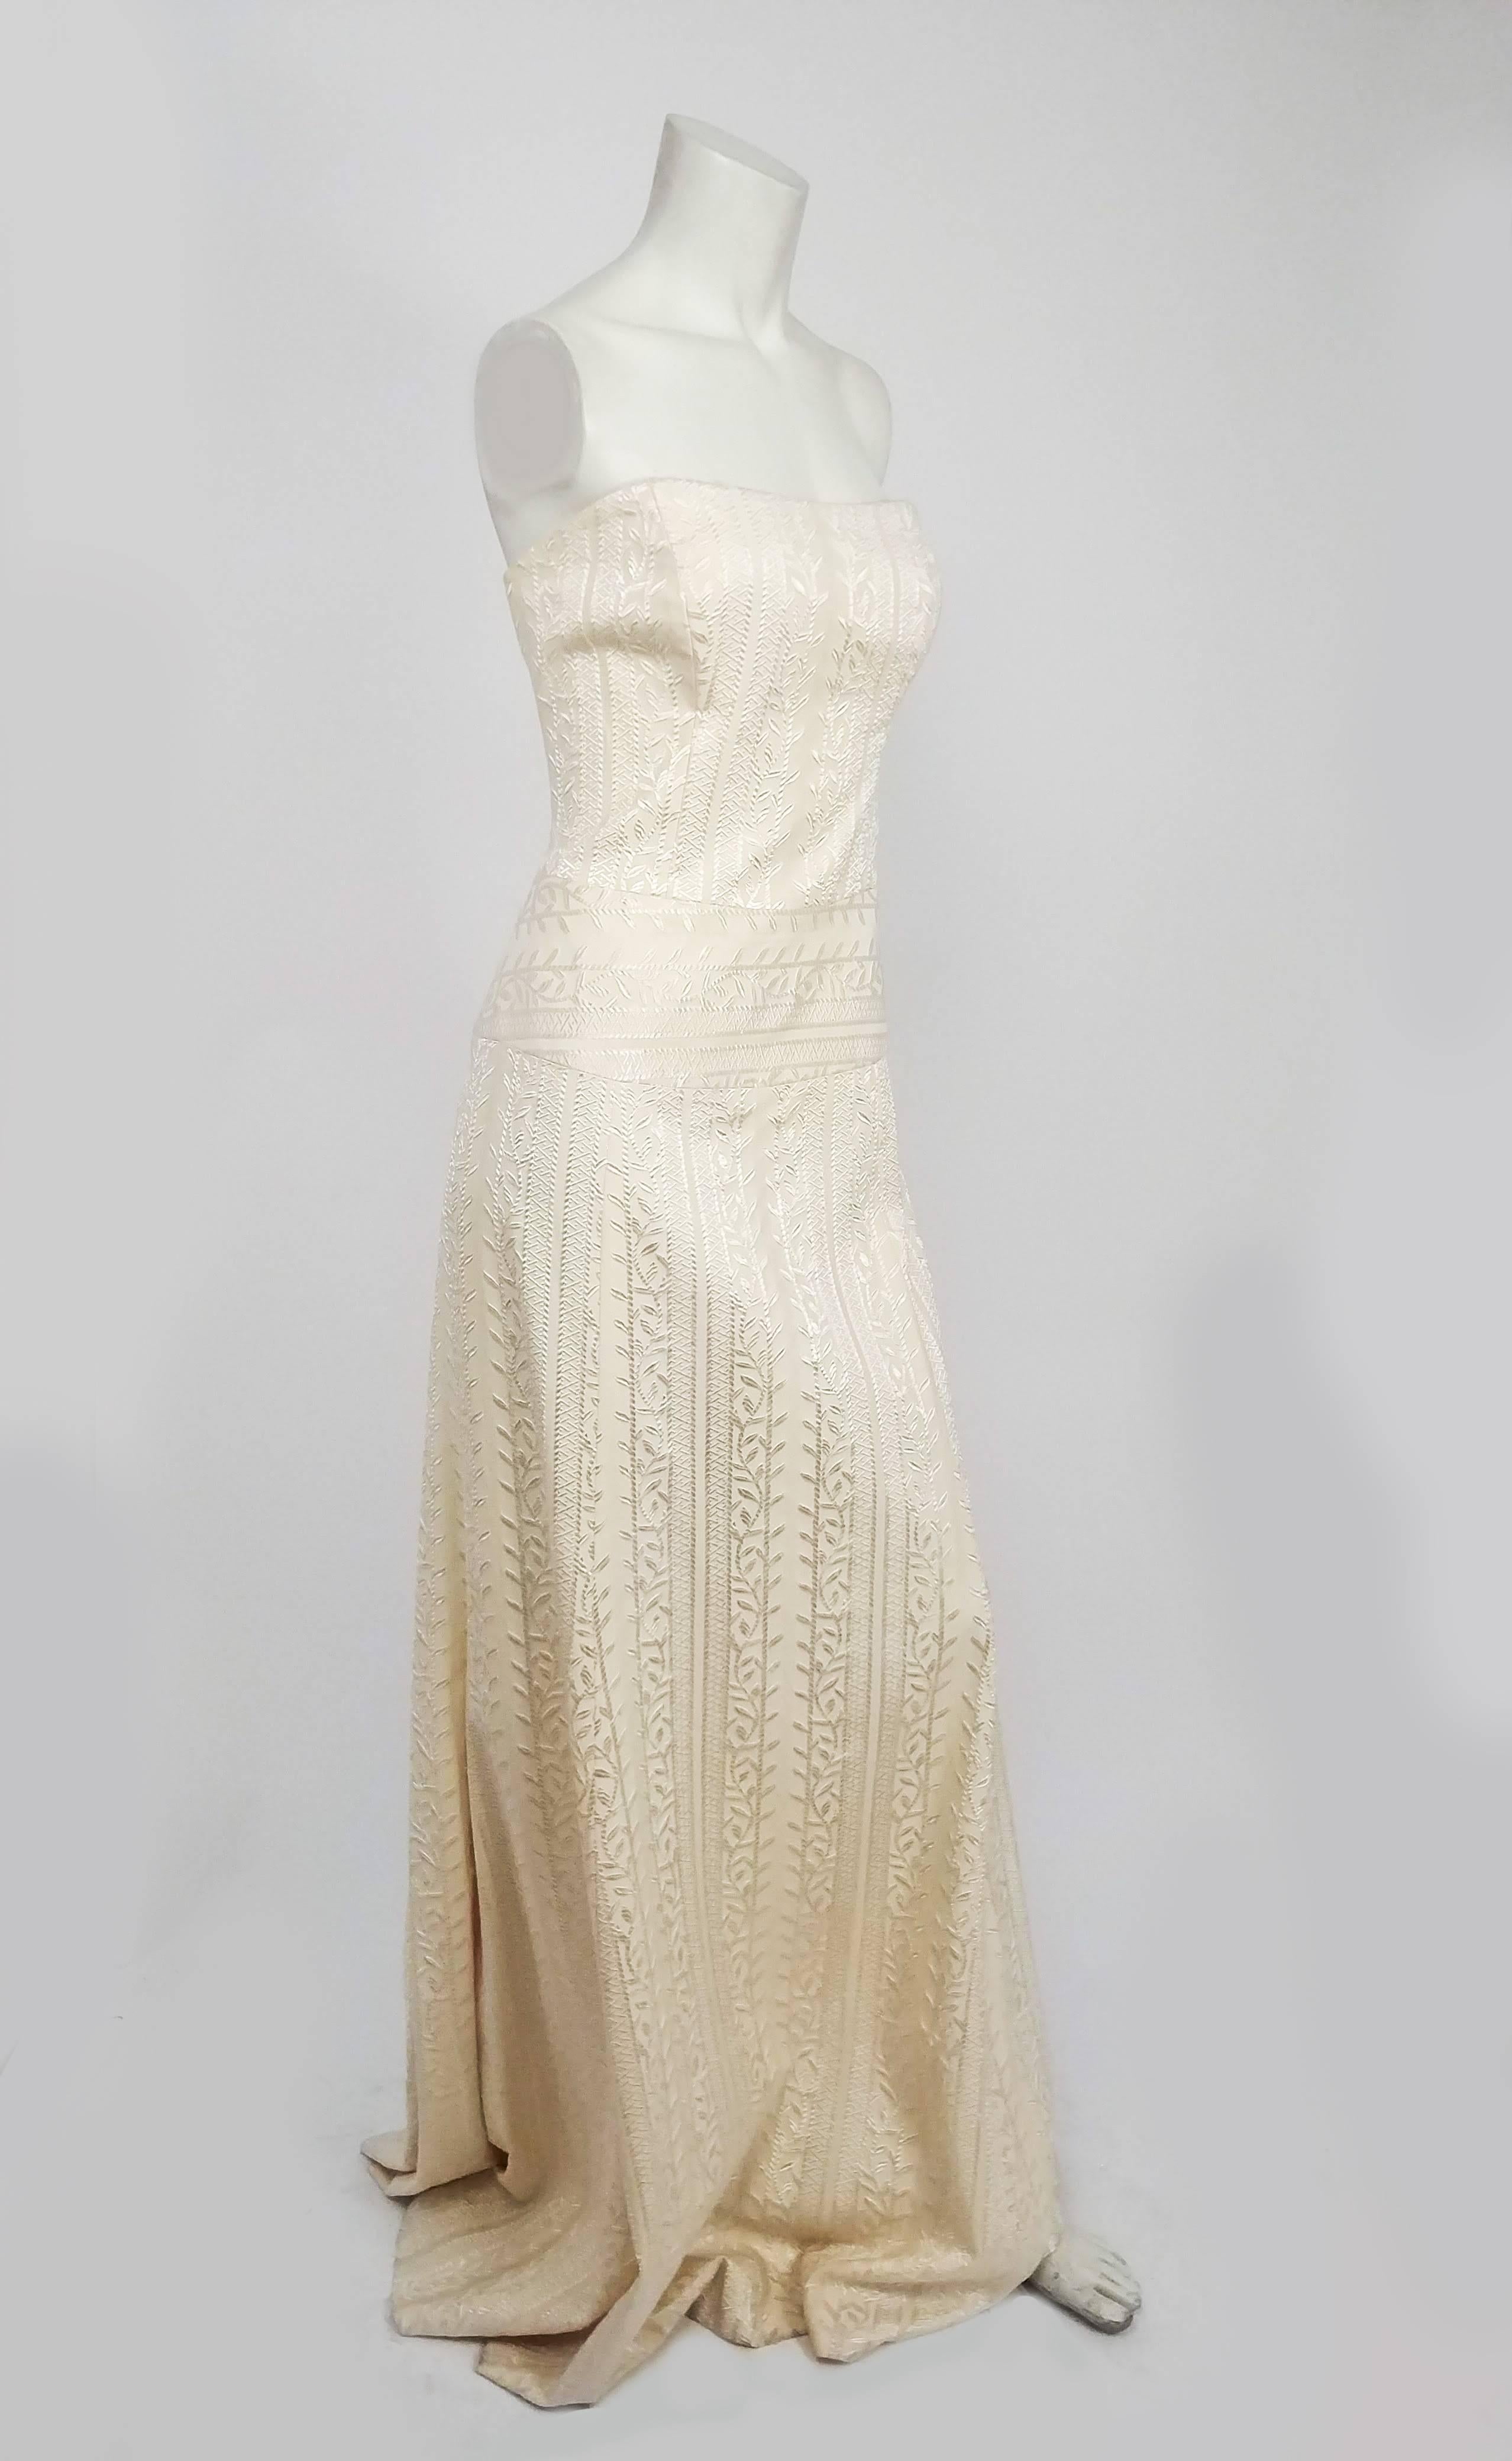 1990s Nicole Miller Strapless Ivory Jacquard Dress. Fitted bodice, foliage pattern woven into fabric. Faux covered buttons up back, side zip closure. Matching shawl with ribbon ties. 